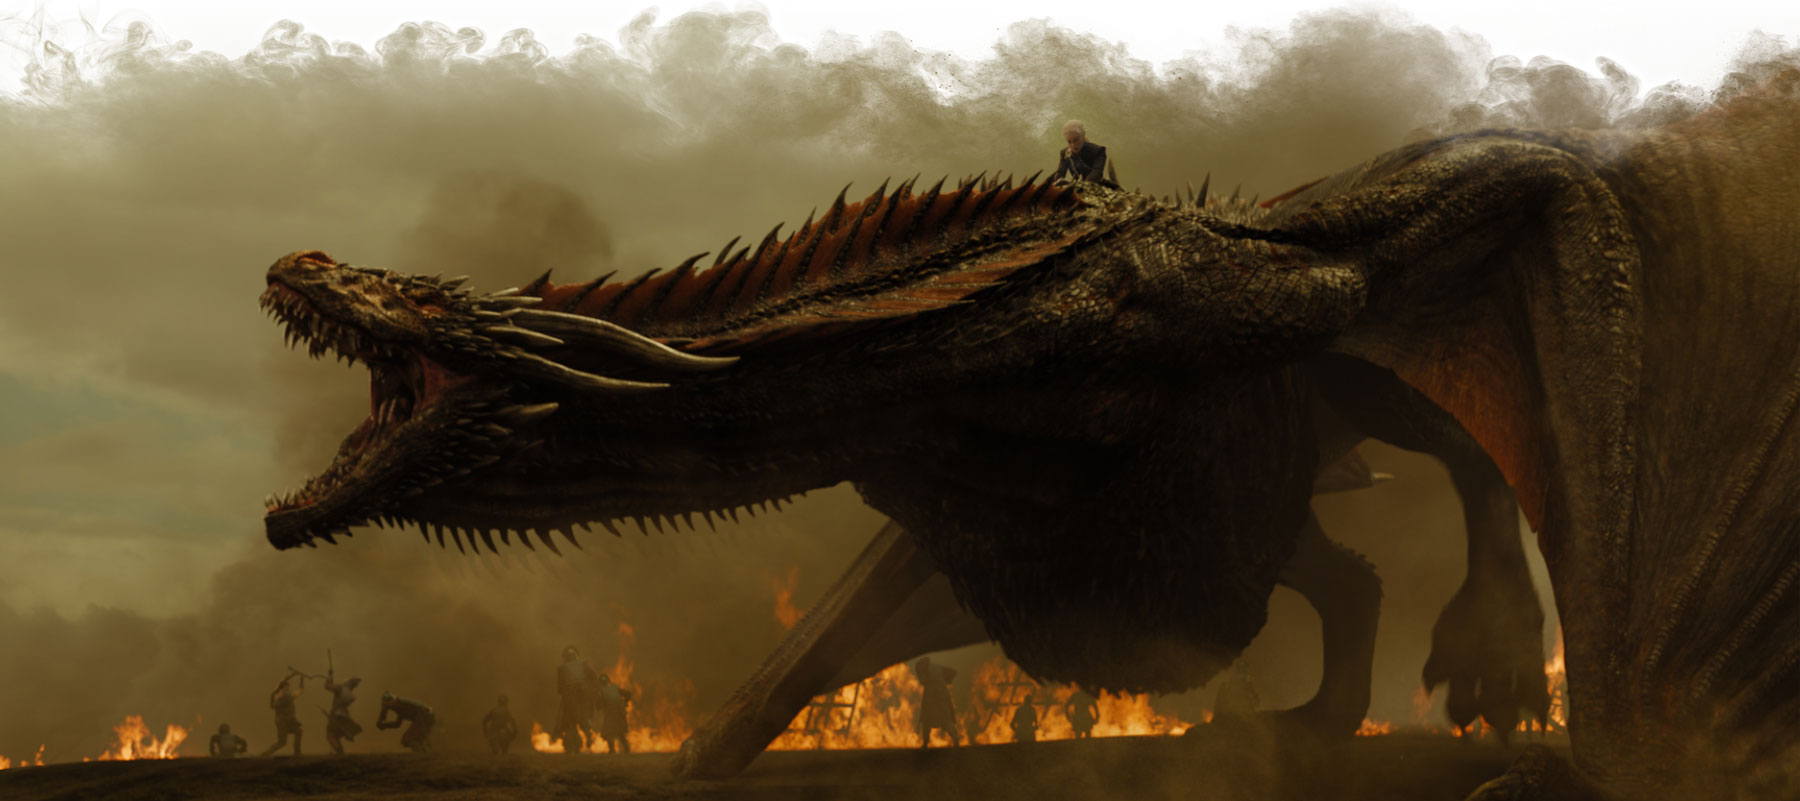 In a scene from HBO's Game of Thrones, Daenerys Targaryen rides a dragon into battle.